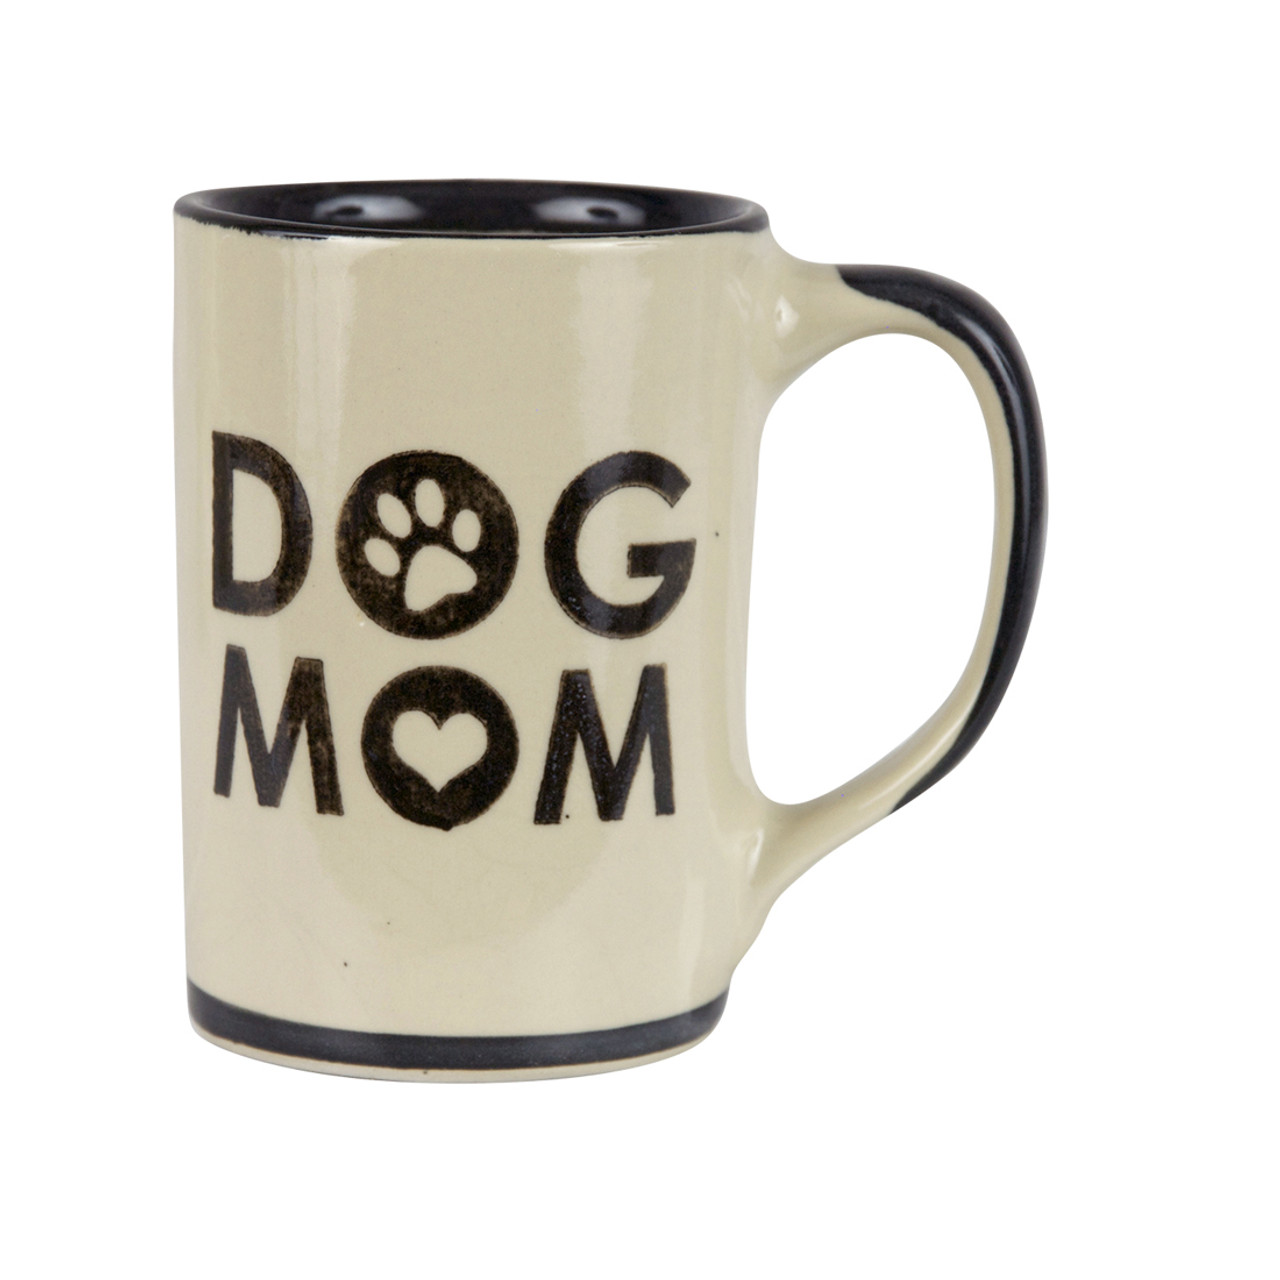 Funny Ceramic Dog Mug - Handmade gifts and pottery in New Orleans, LA —  Home Malone